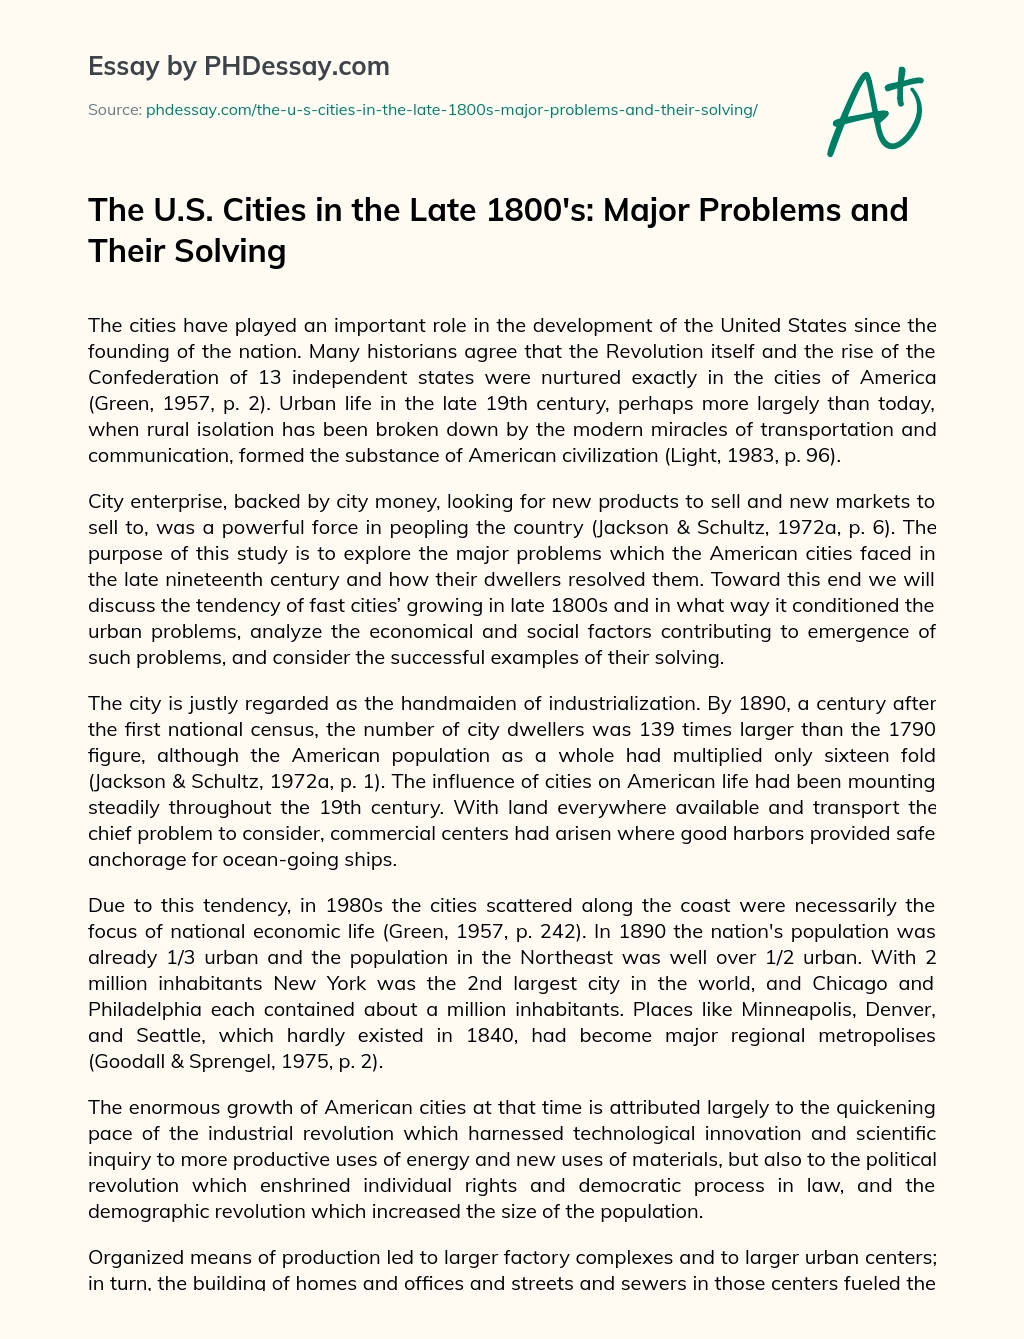 The U.S. Cities in the Late 1800’s: Major Problems and Their Solving essay